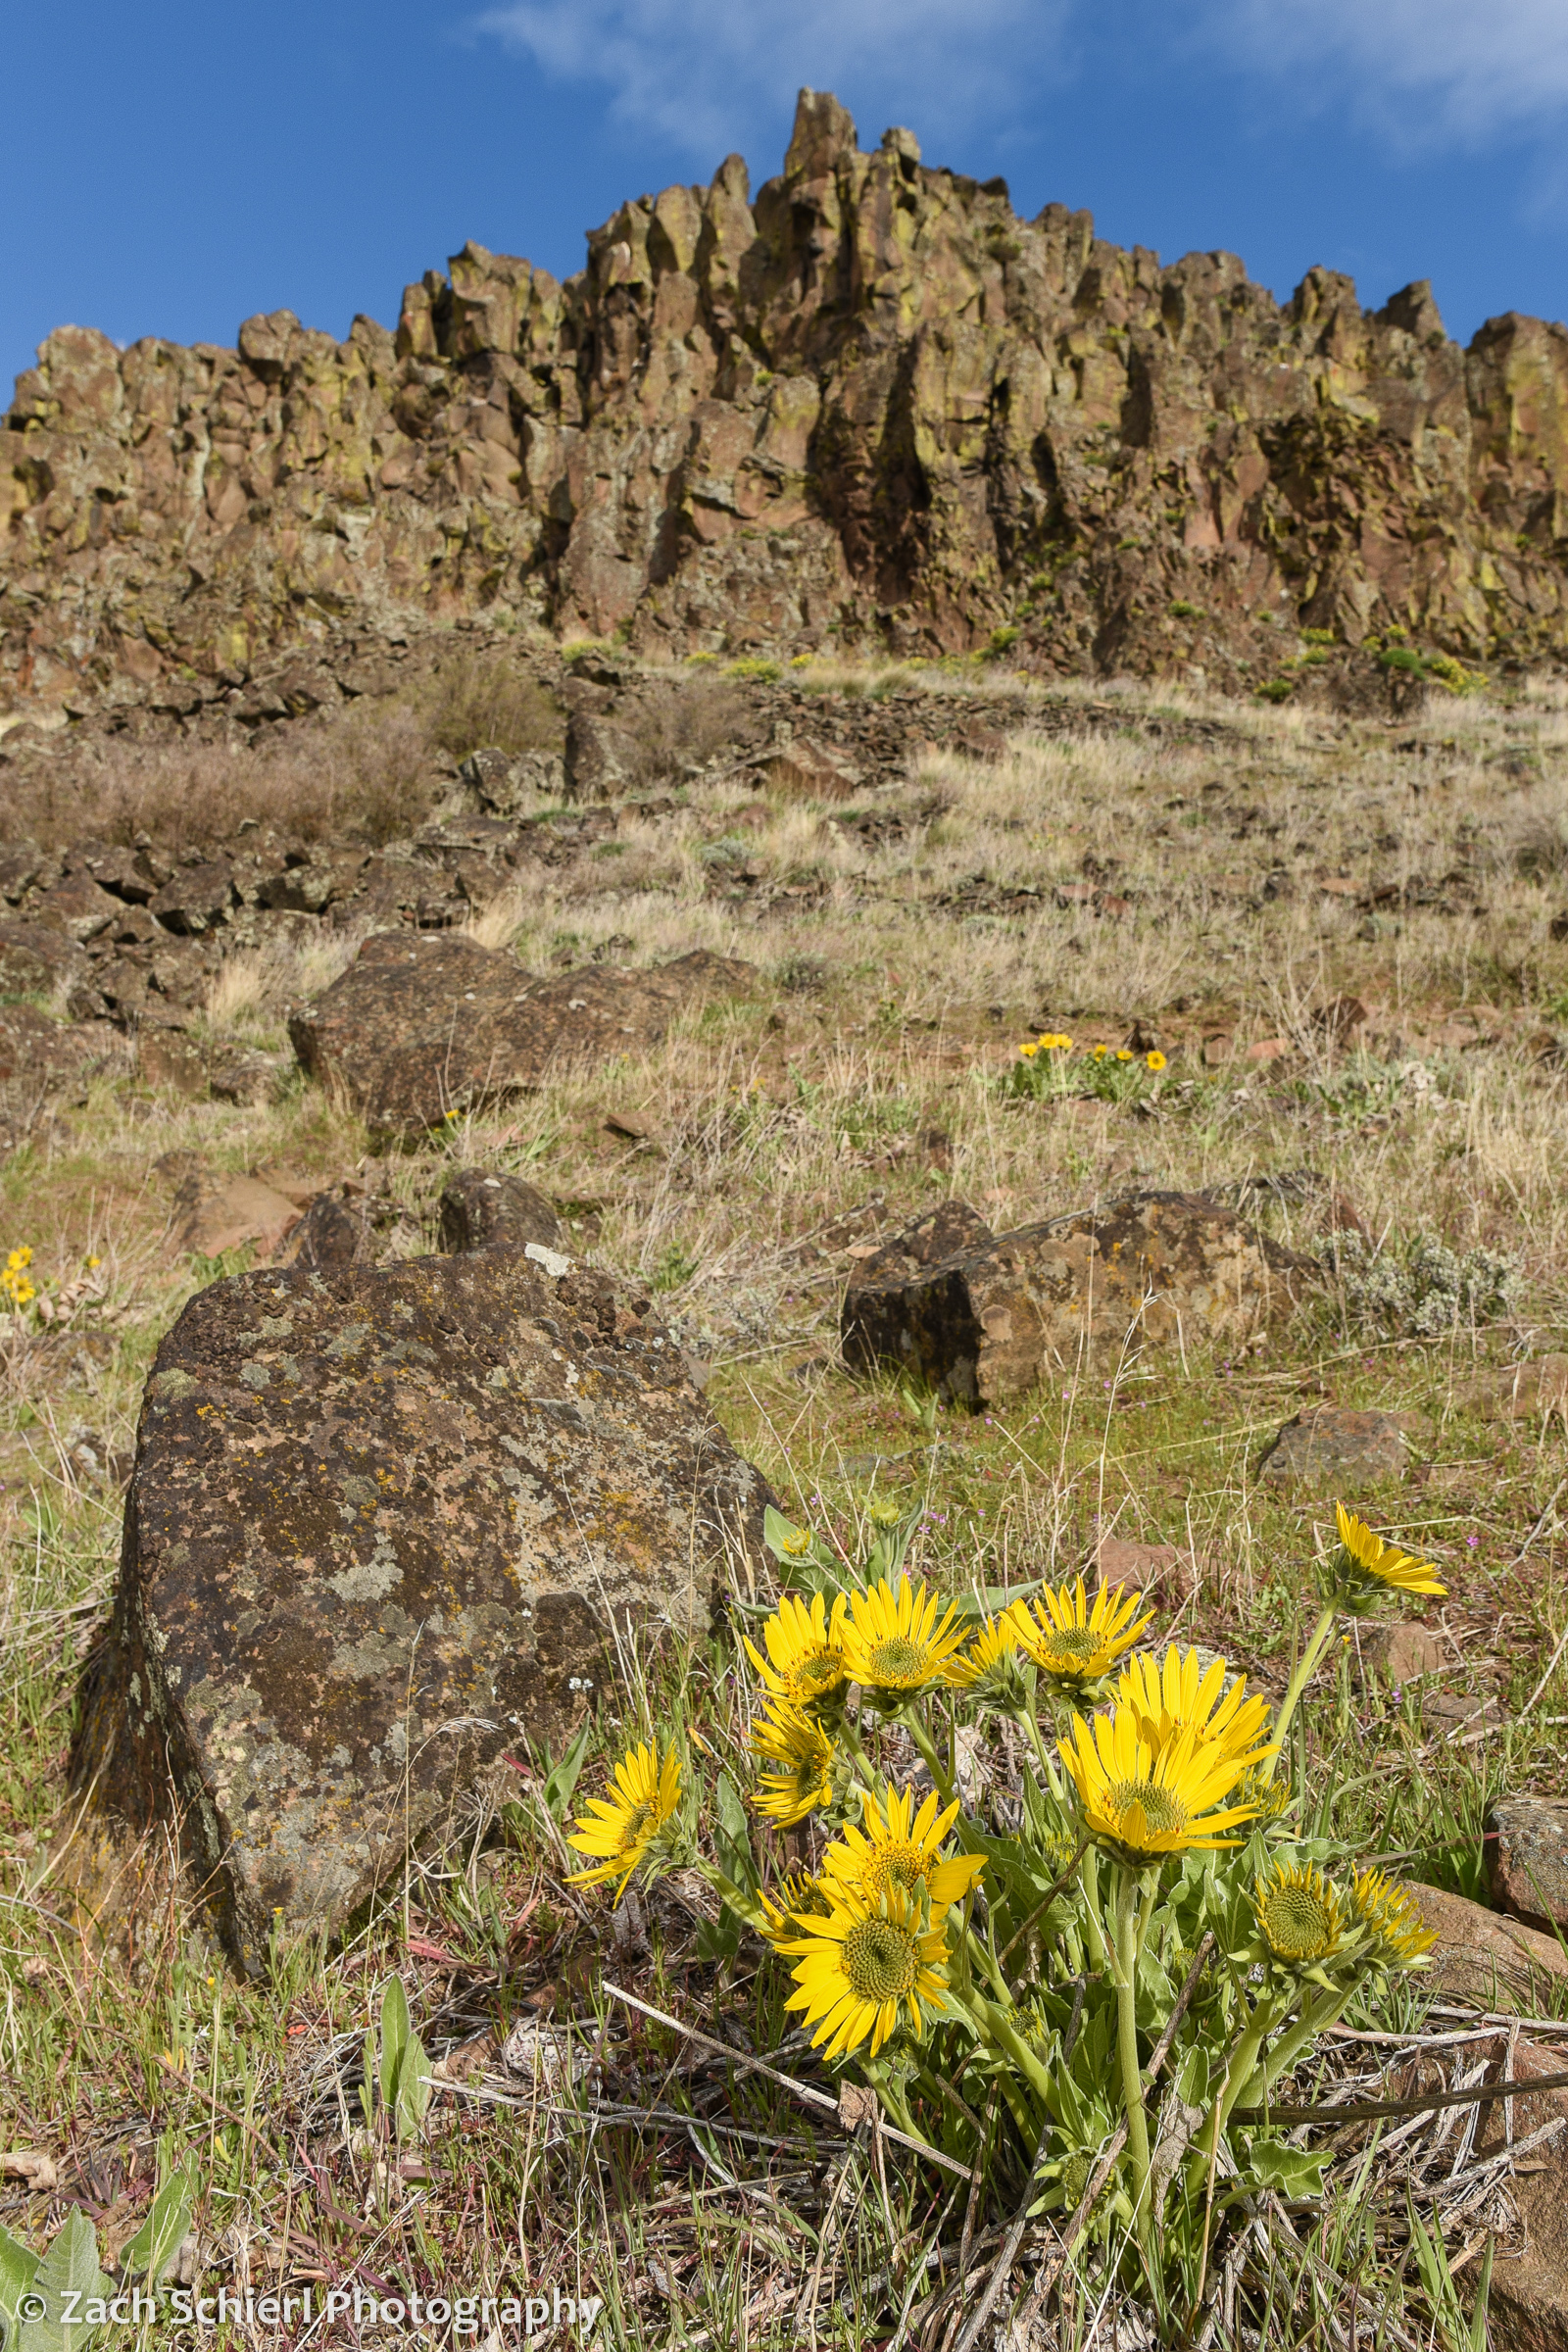 A cluster of large, yellow, daisy-like flowers sits next to a boulder at the base of a tall cliff of brown rocks.